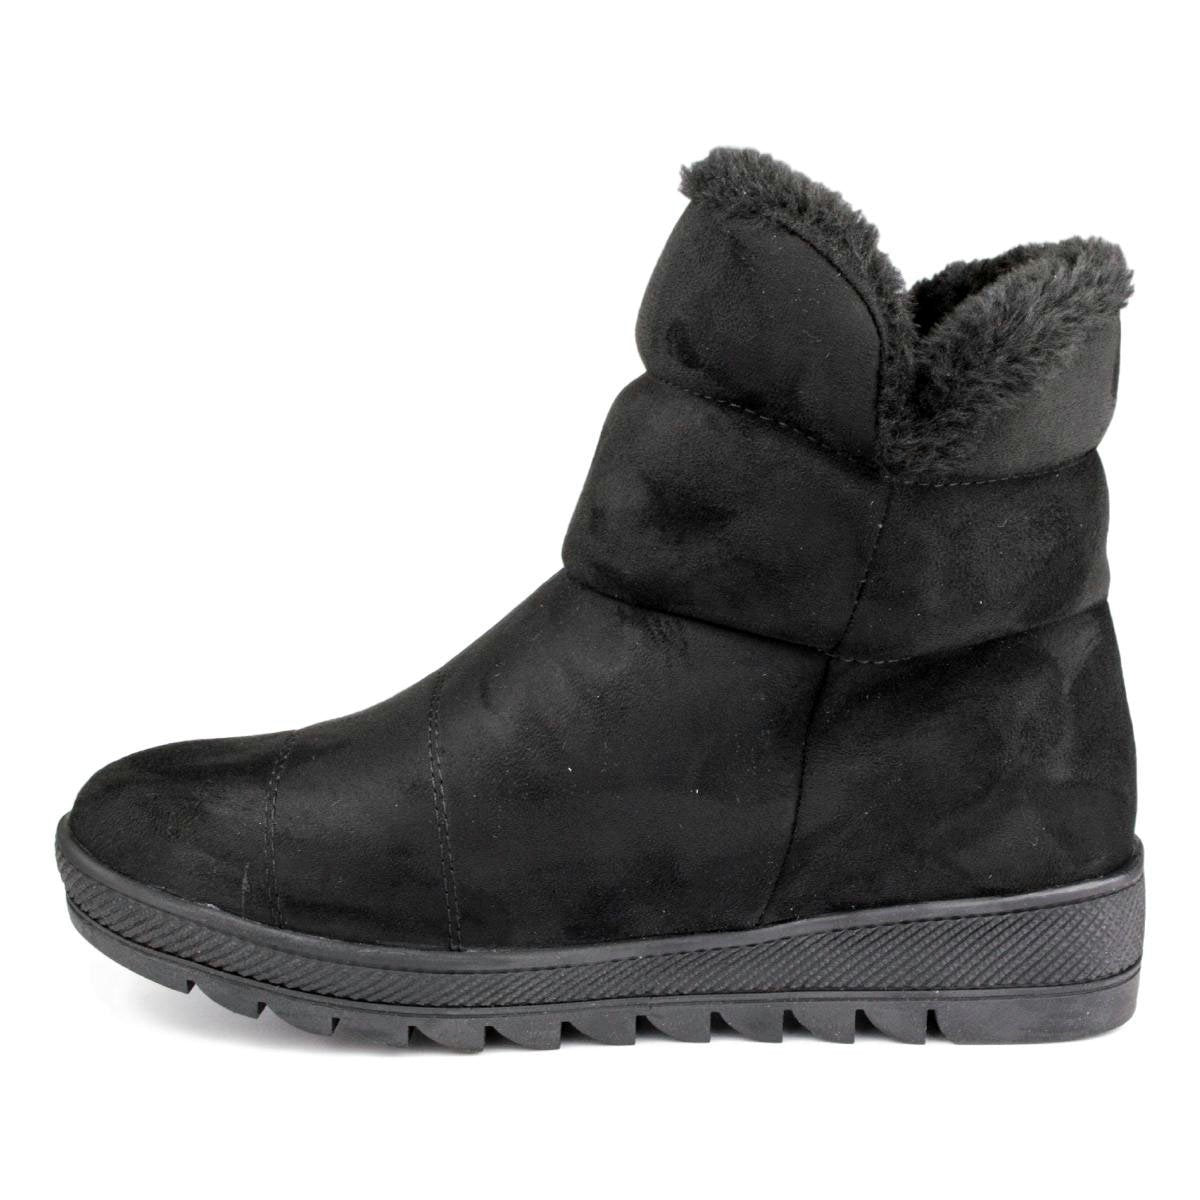 Womens Black Faux Zip Up Boot - Watney Shoes 